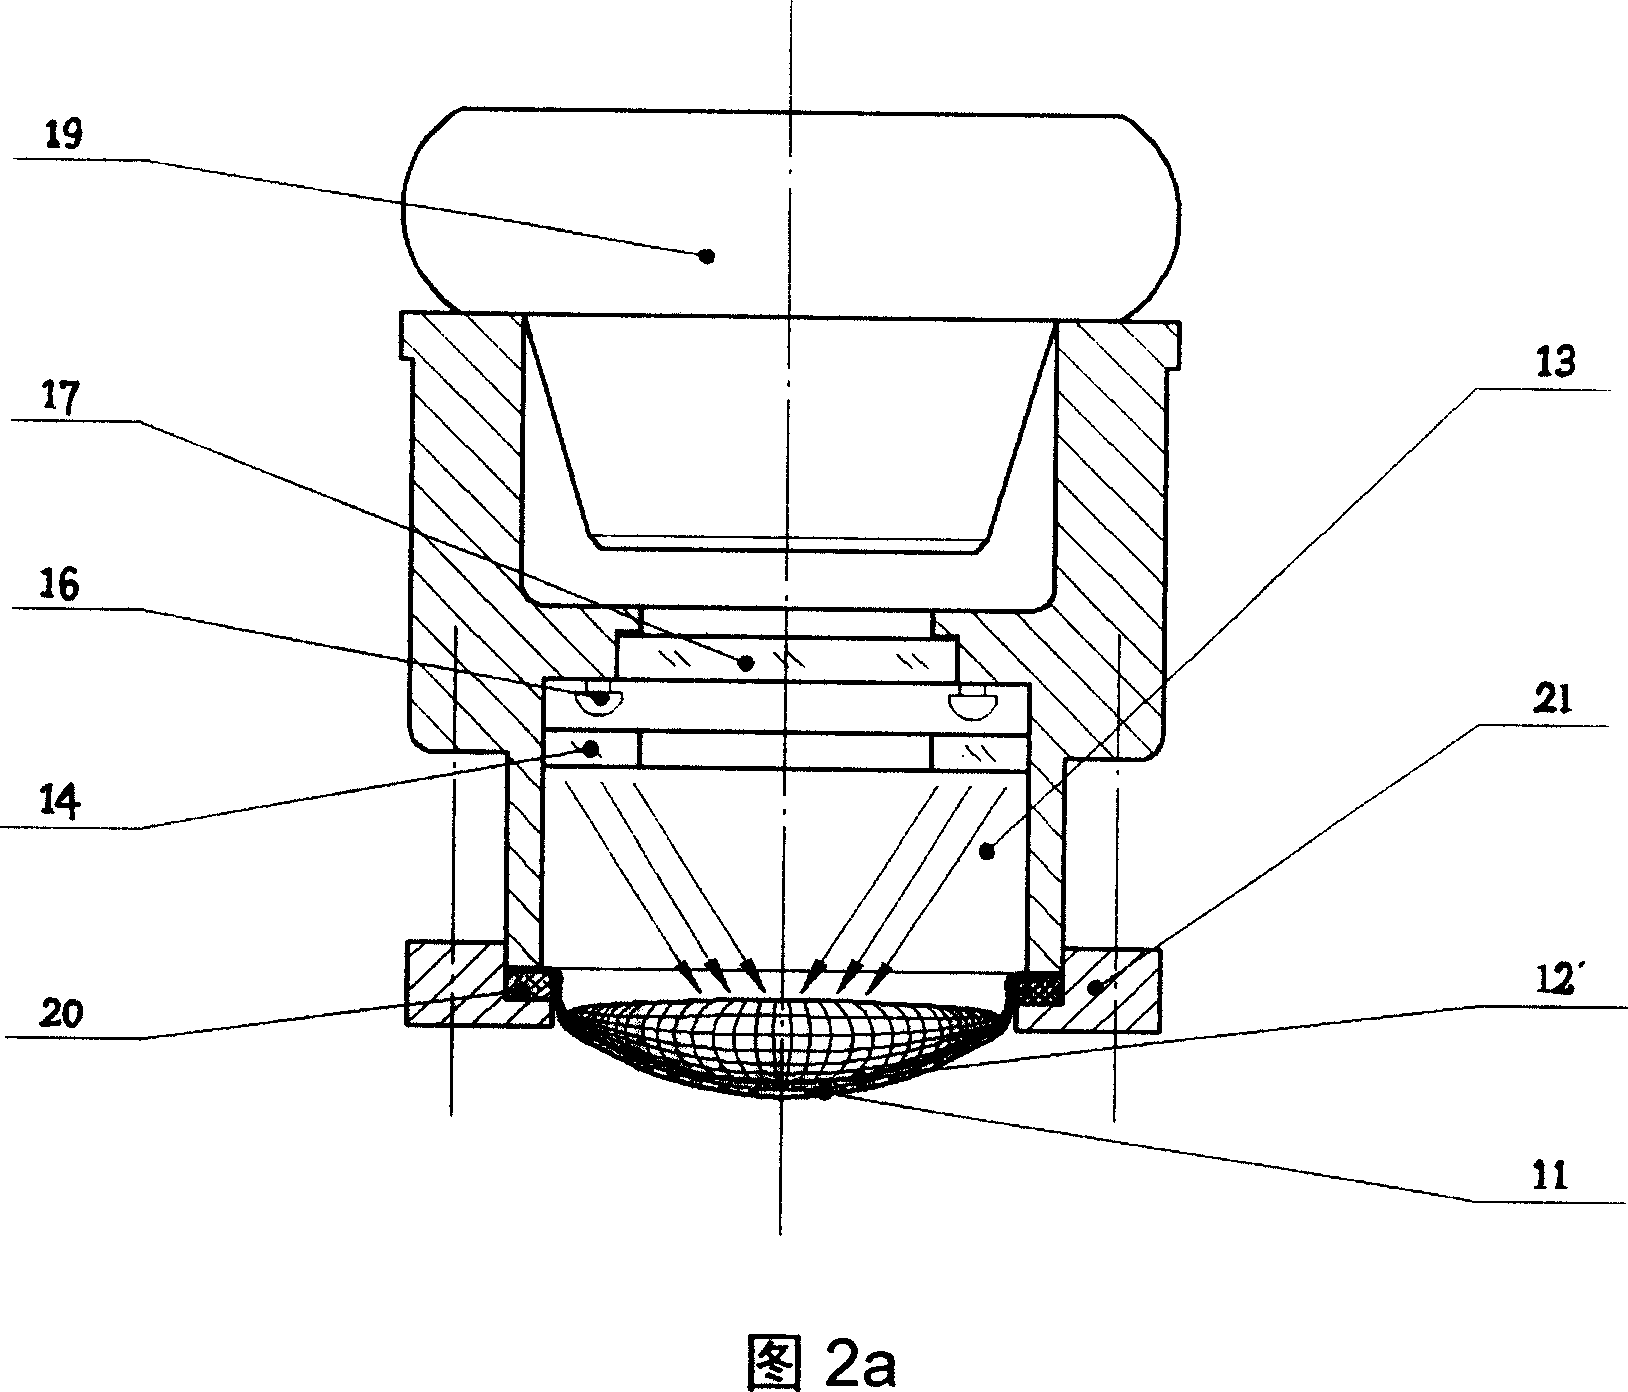 Sphygmus dynamic image information collecting system